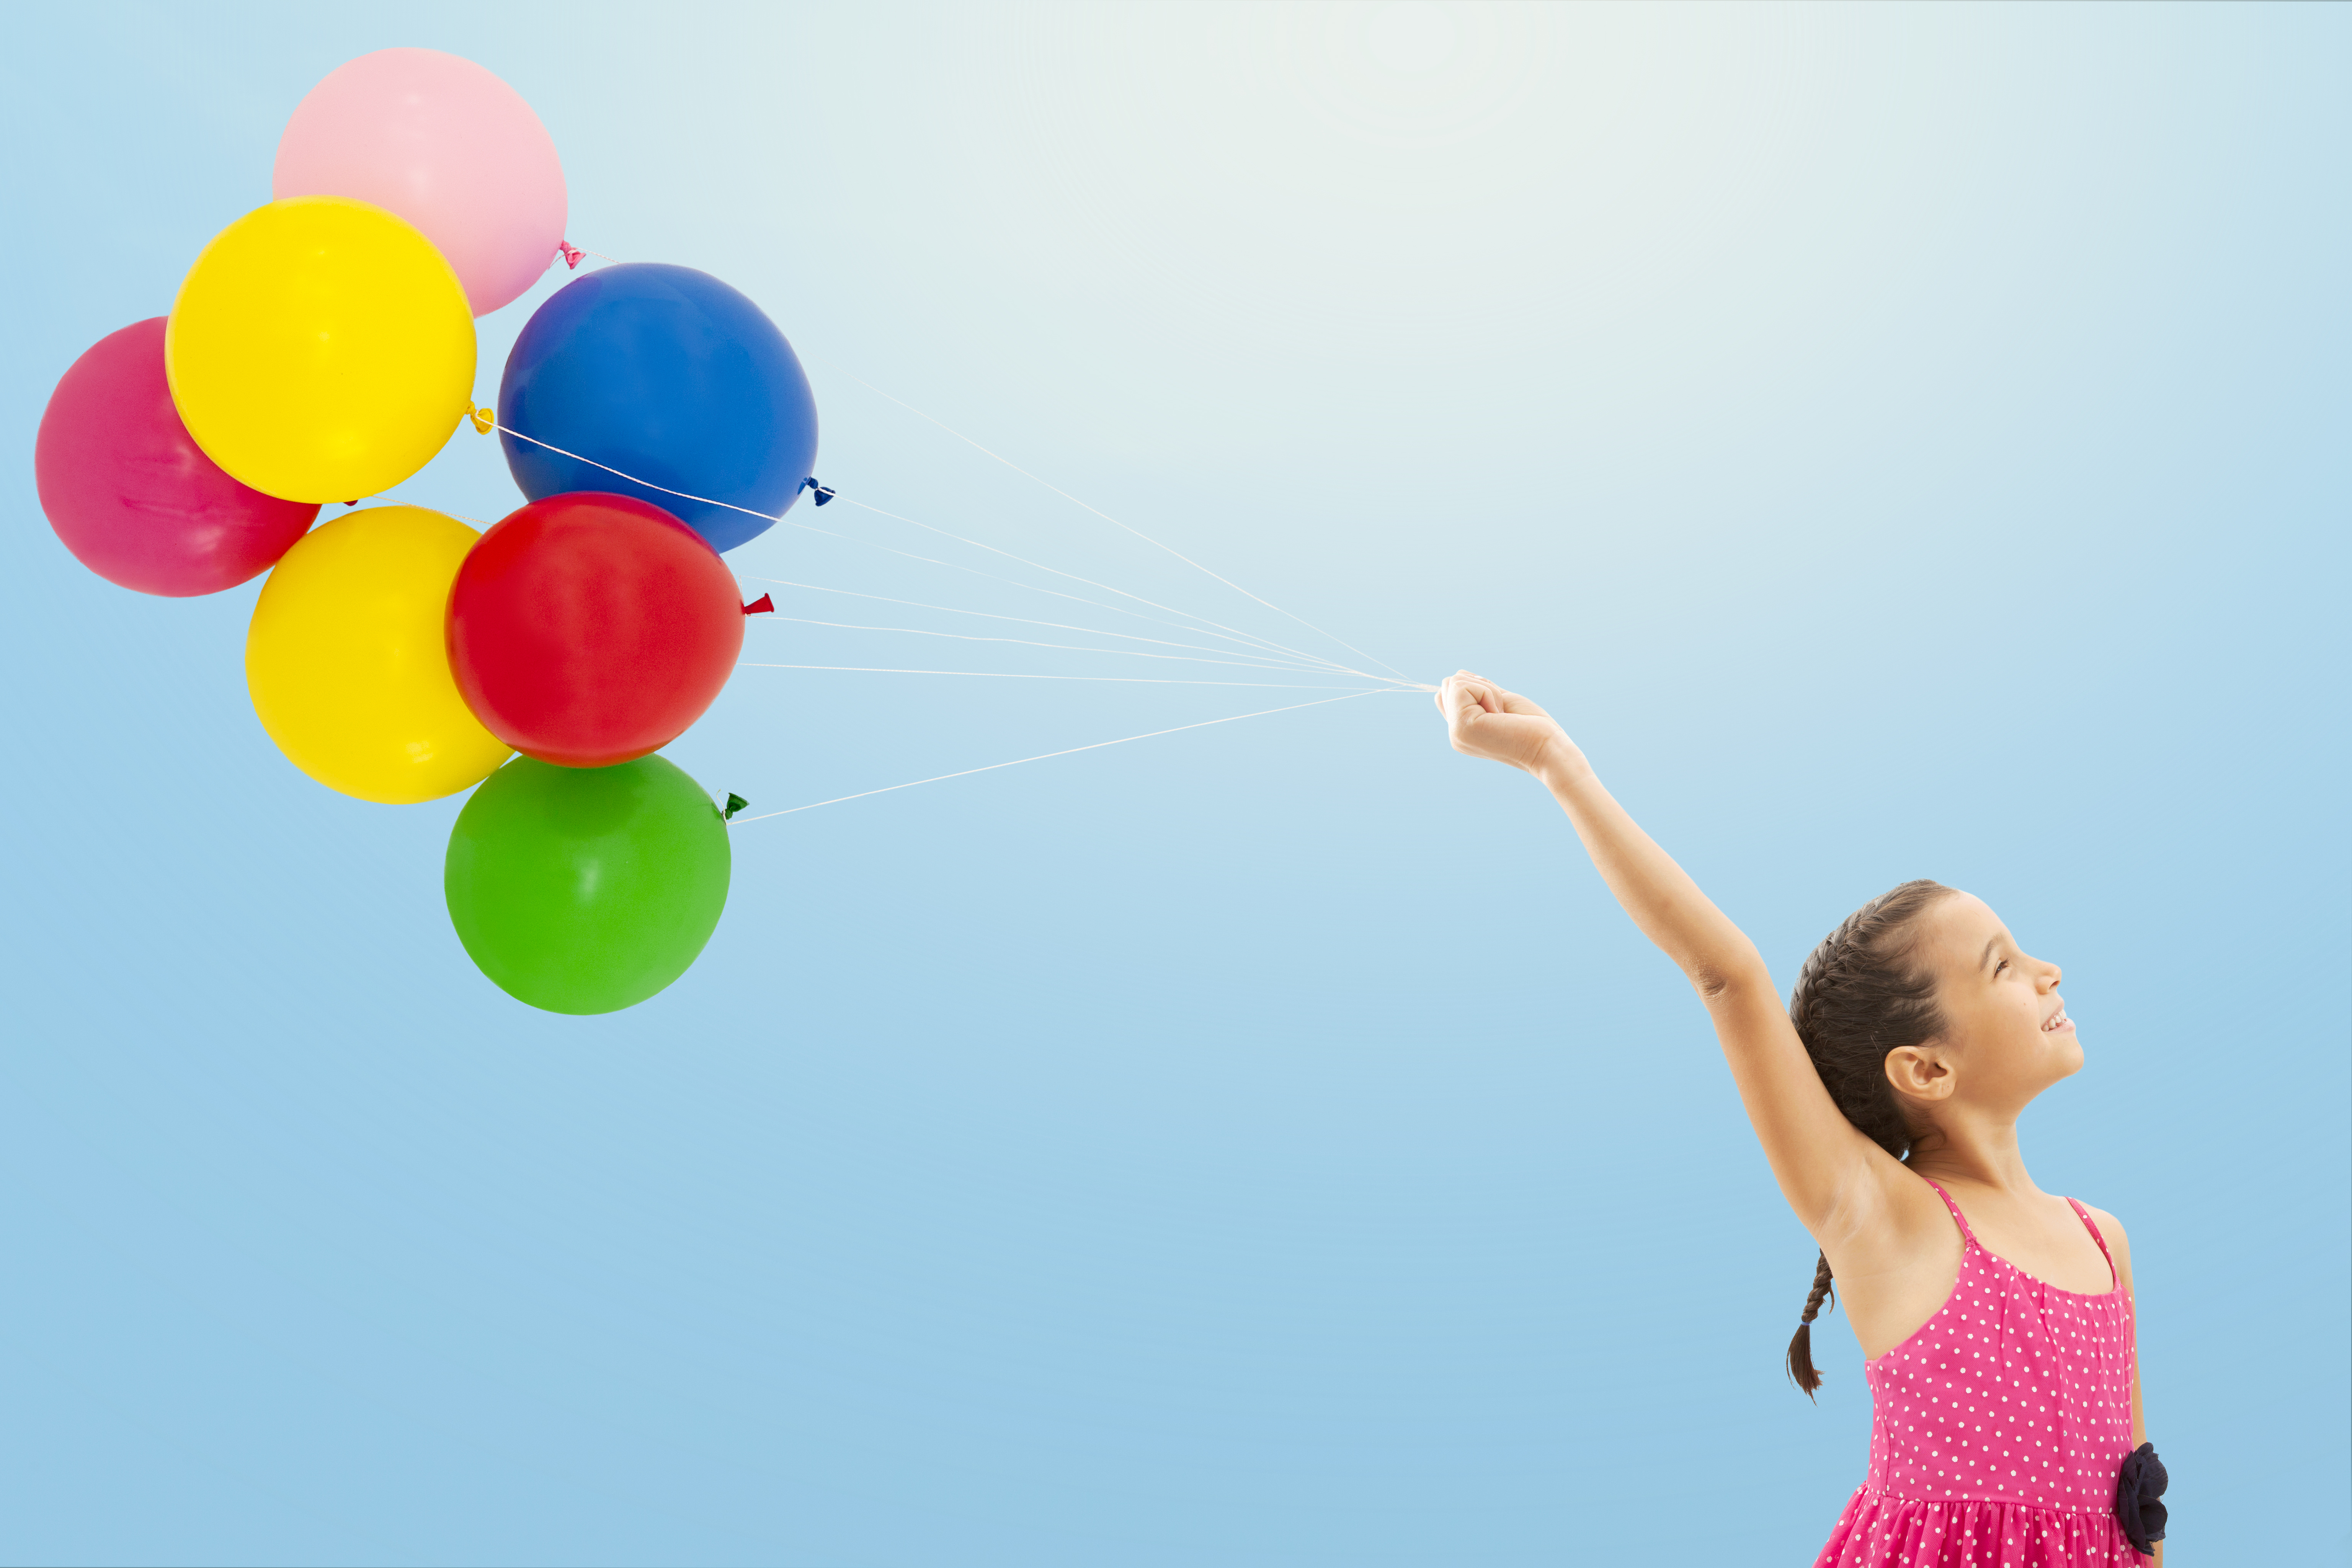 Little girl with balloons on sky background